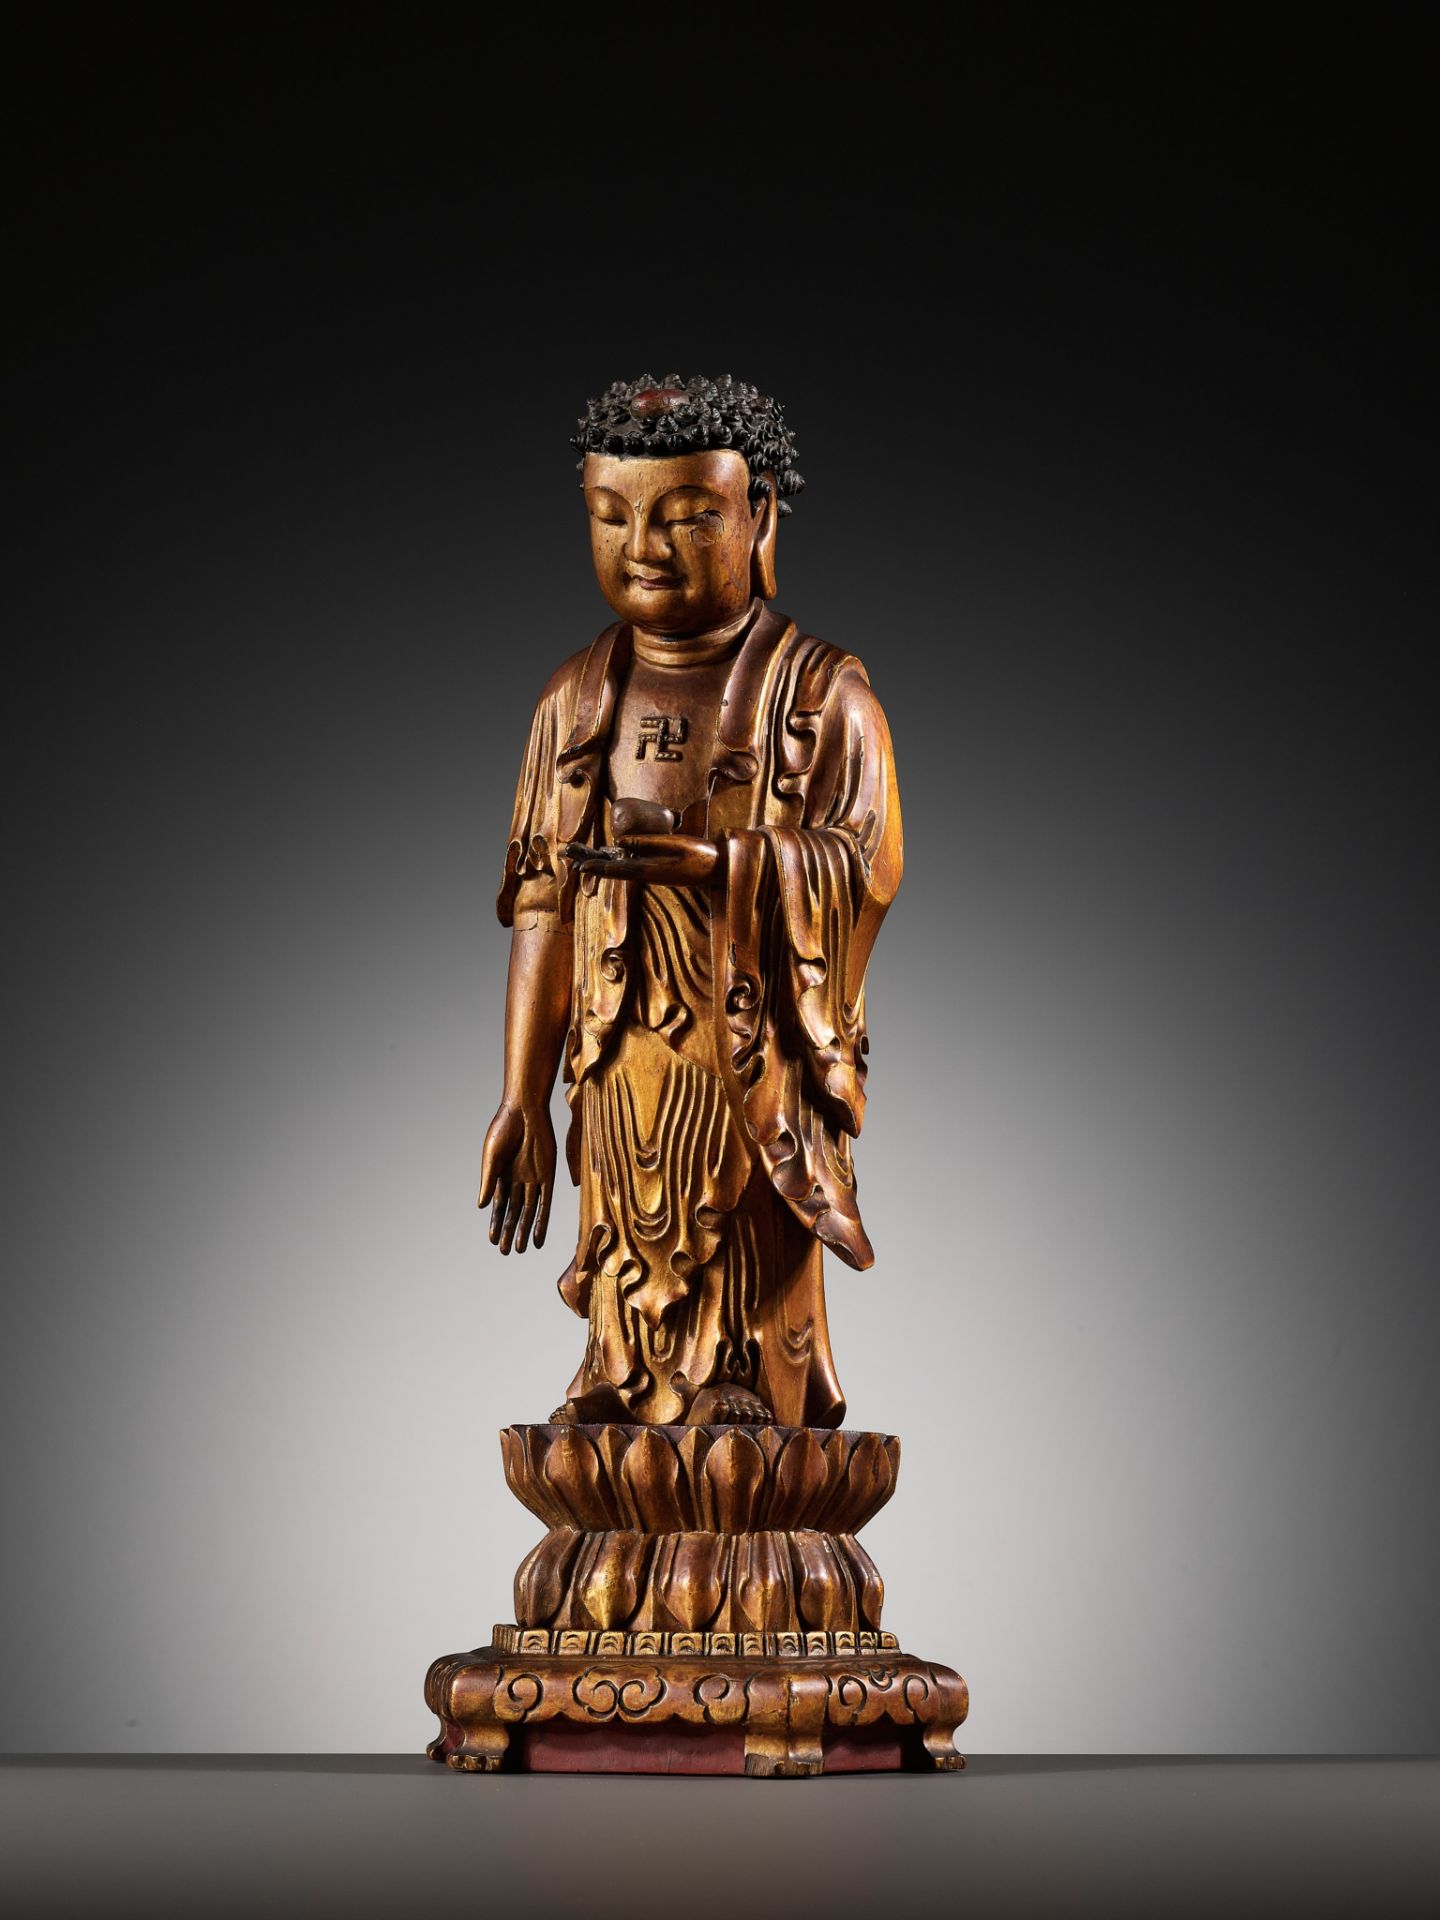 A LACQUER-GILT WOOD FIGURE OF THE STANDING BUDDHA, CHINA, 17TH - 18TH CENTURY - Image 8 of 15